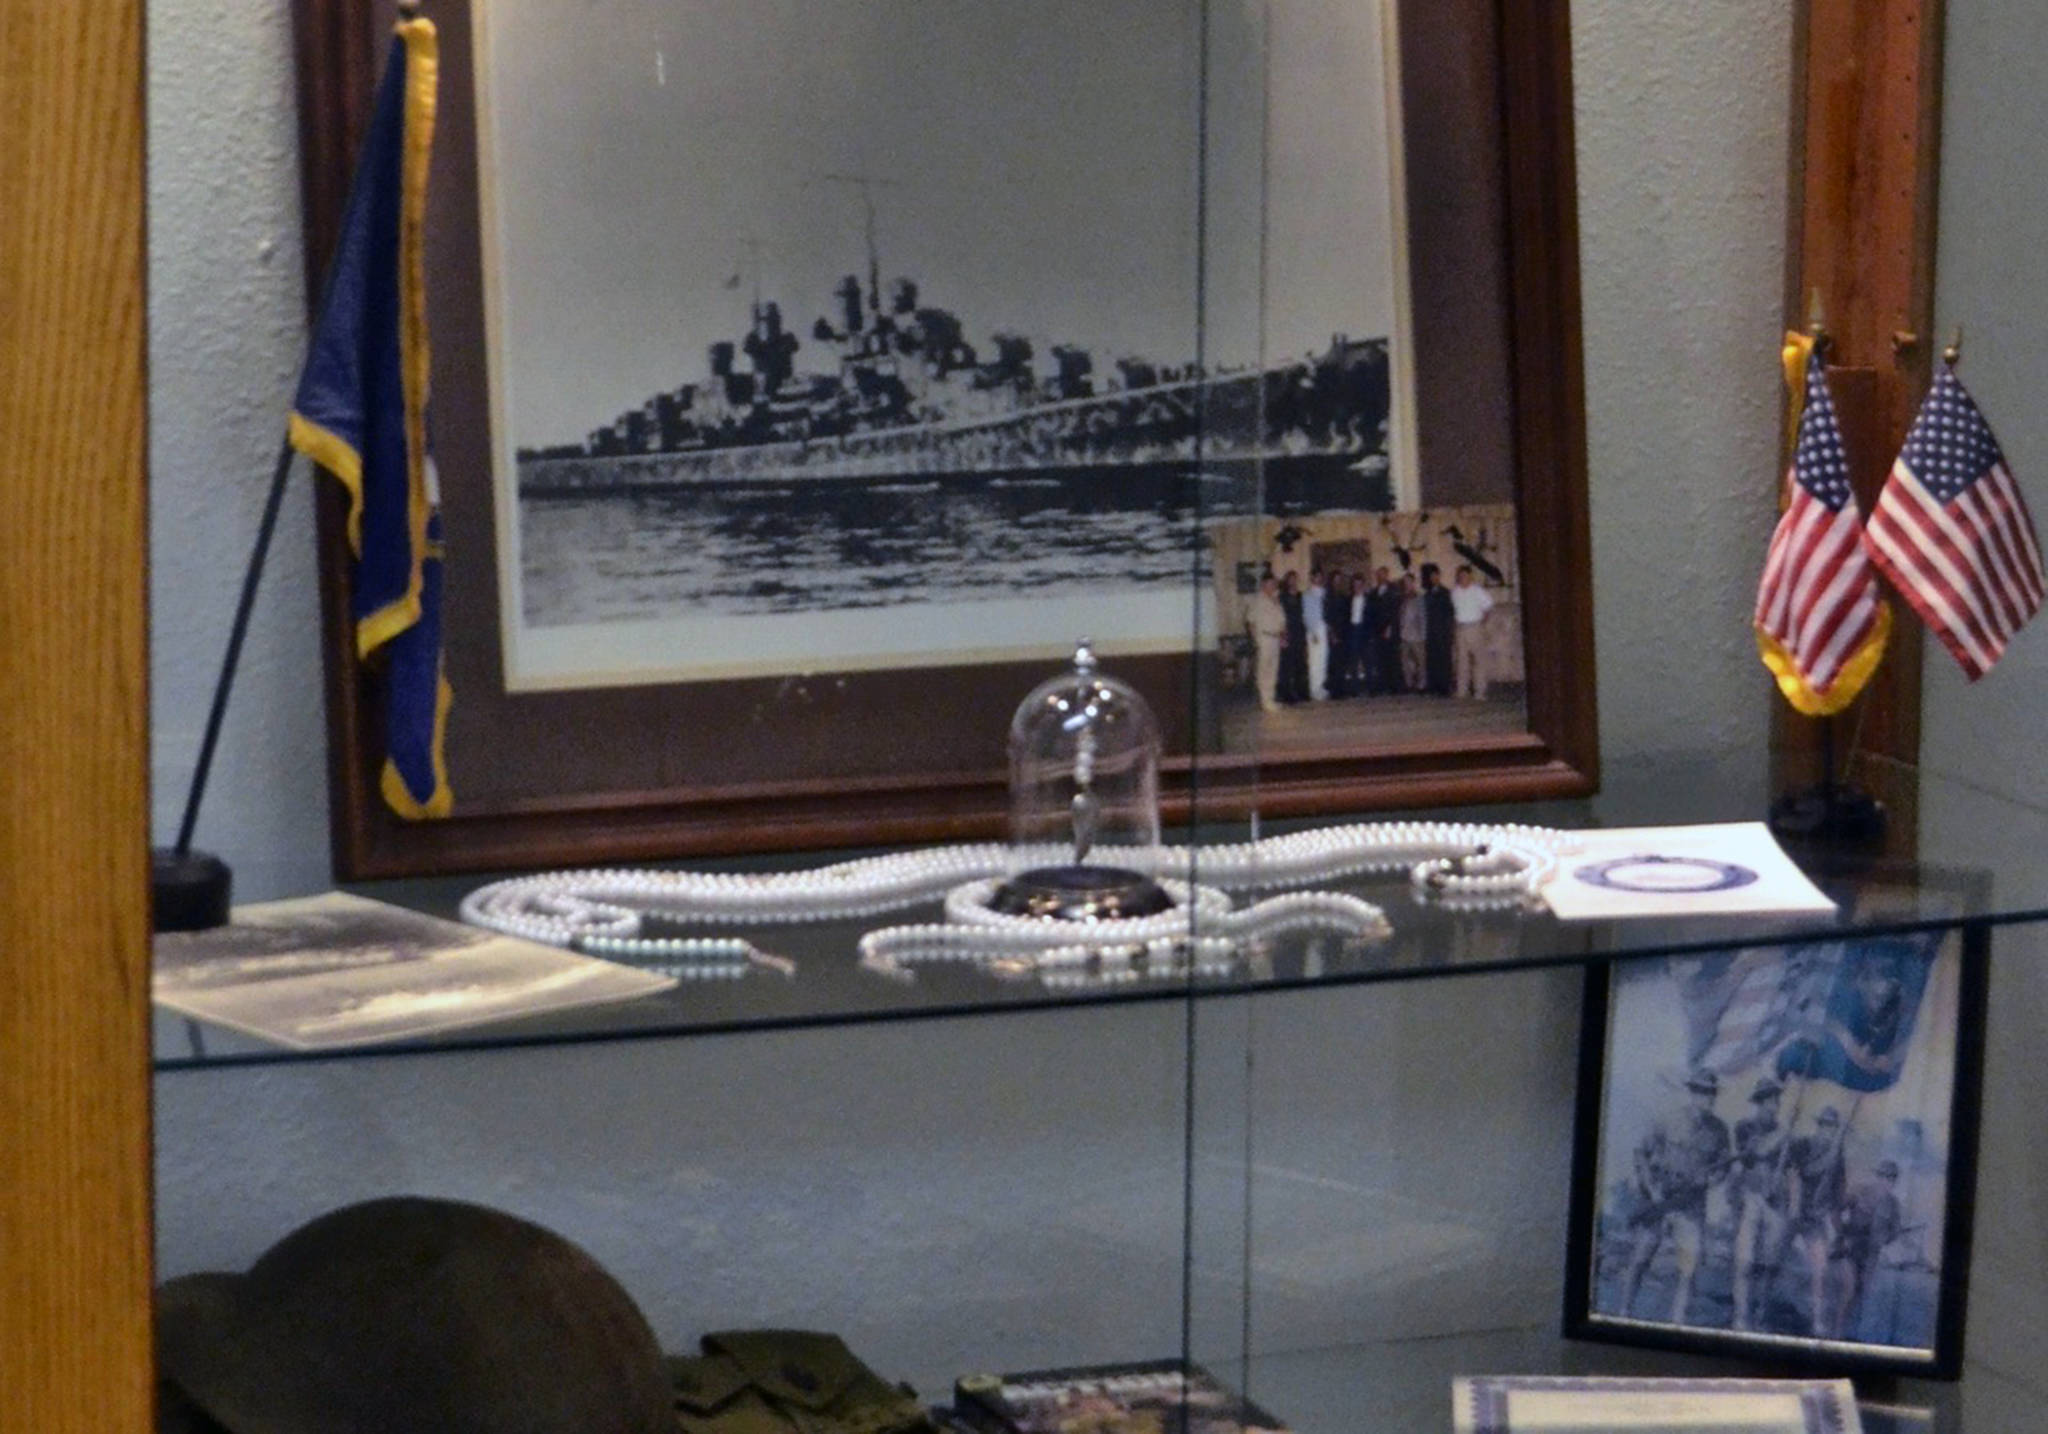 This undated photograph shows the the USS Juneau memorial items that were on display at the American Legion Auke Bay Post #25. The long strand of beads represented those immediately killed during the torpedoing and sinking of the ship, another strand represented those who were alive and in the water, and the short strand represented those who were rescued from the water days later. The final few beads in the glass dome represented those who were still living at the time of the 75th anniversary presentation. (Courtesy photo | American Legion Auke Bay Post #25)